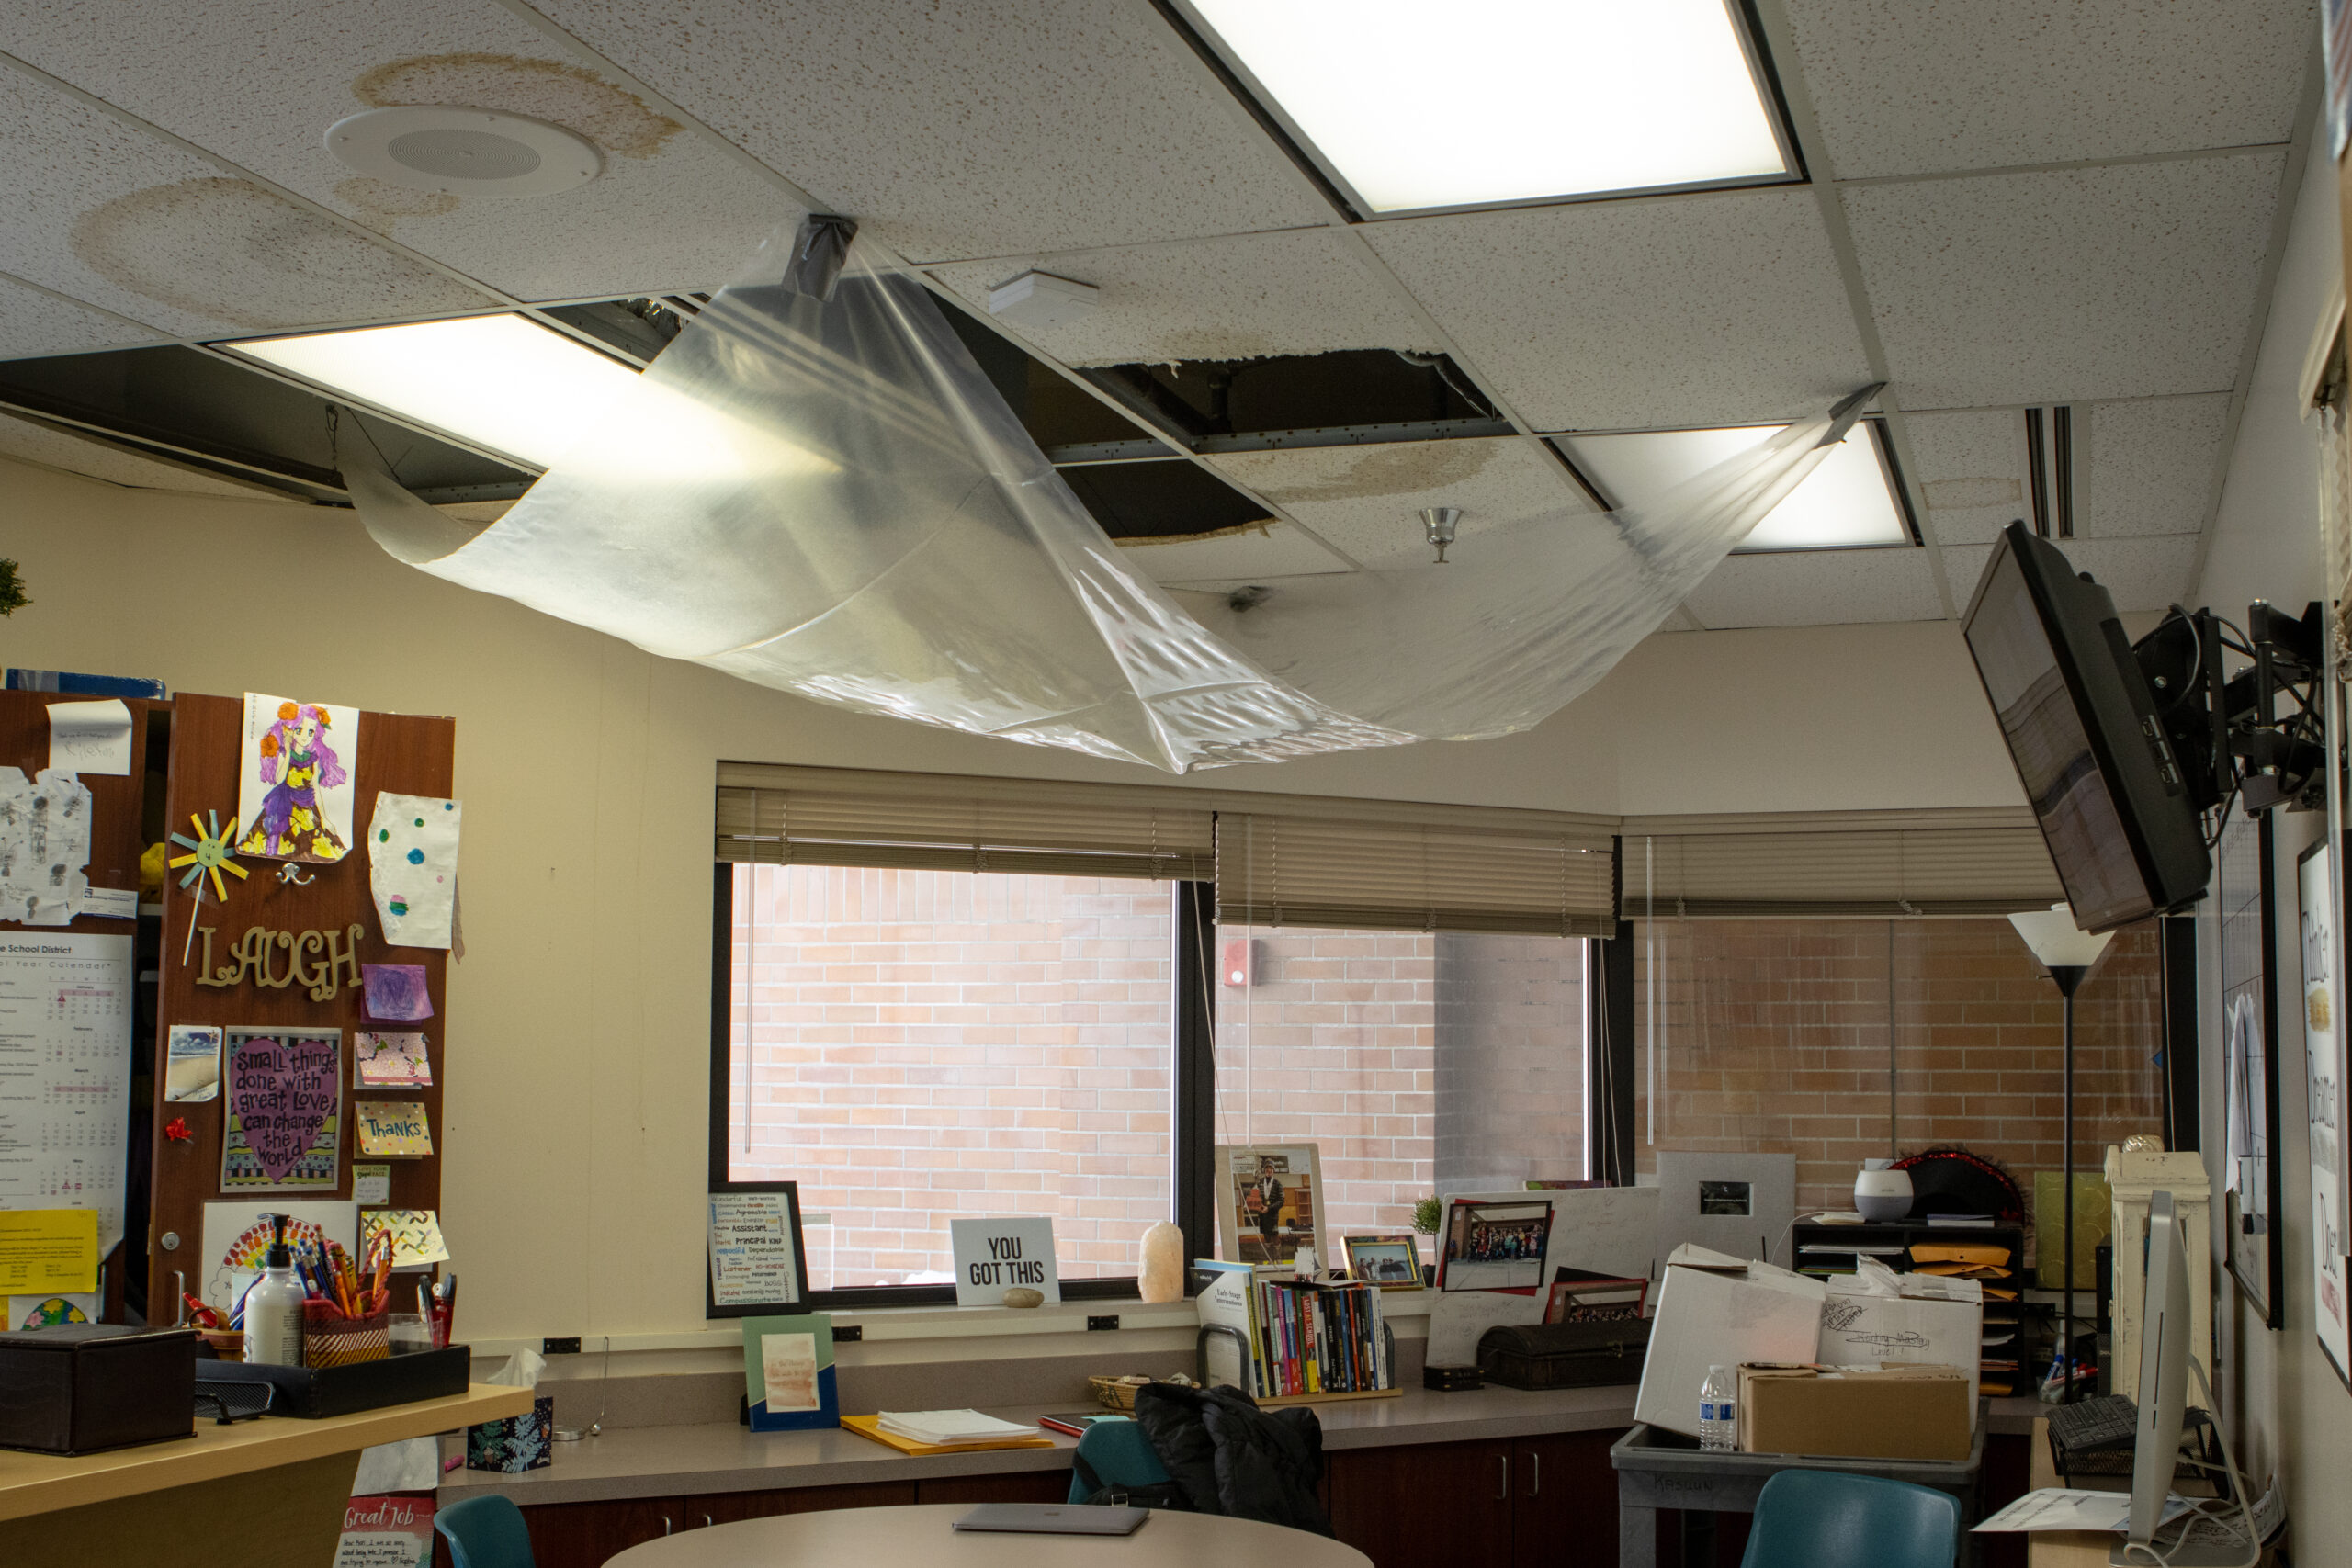 A schools office space with a damaged roof and ceiling